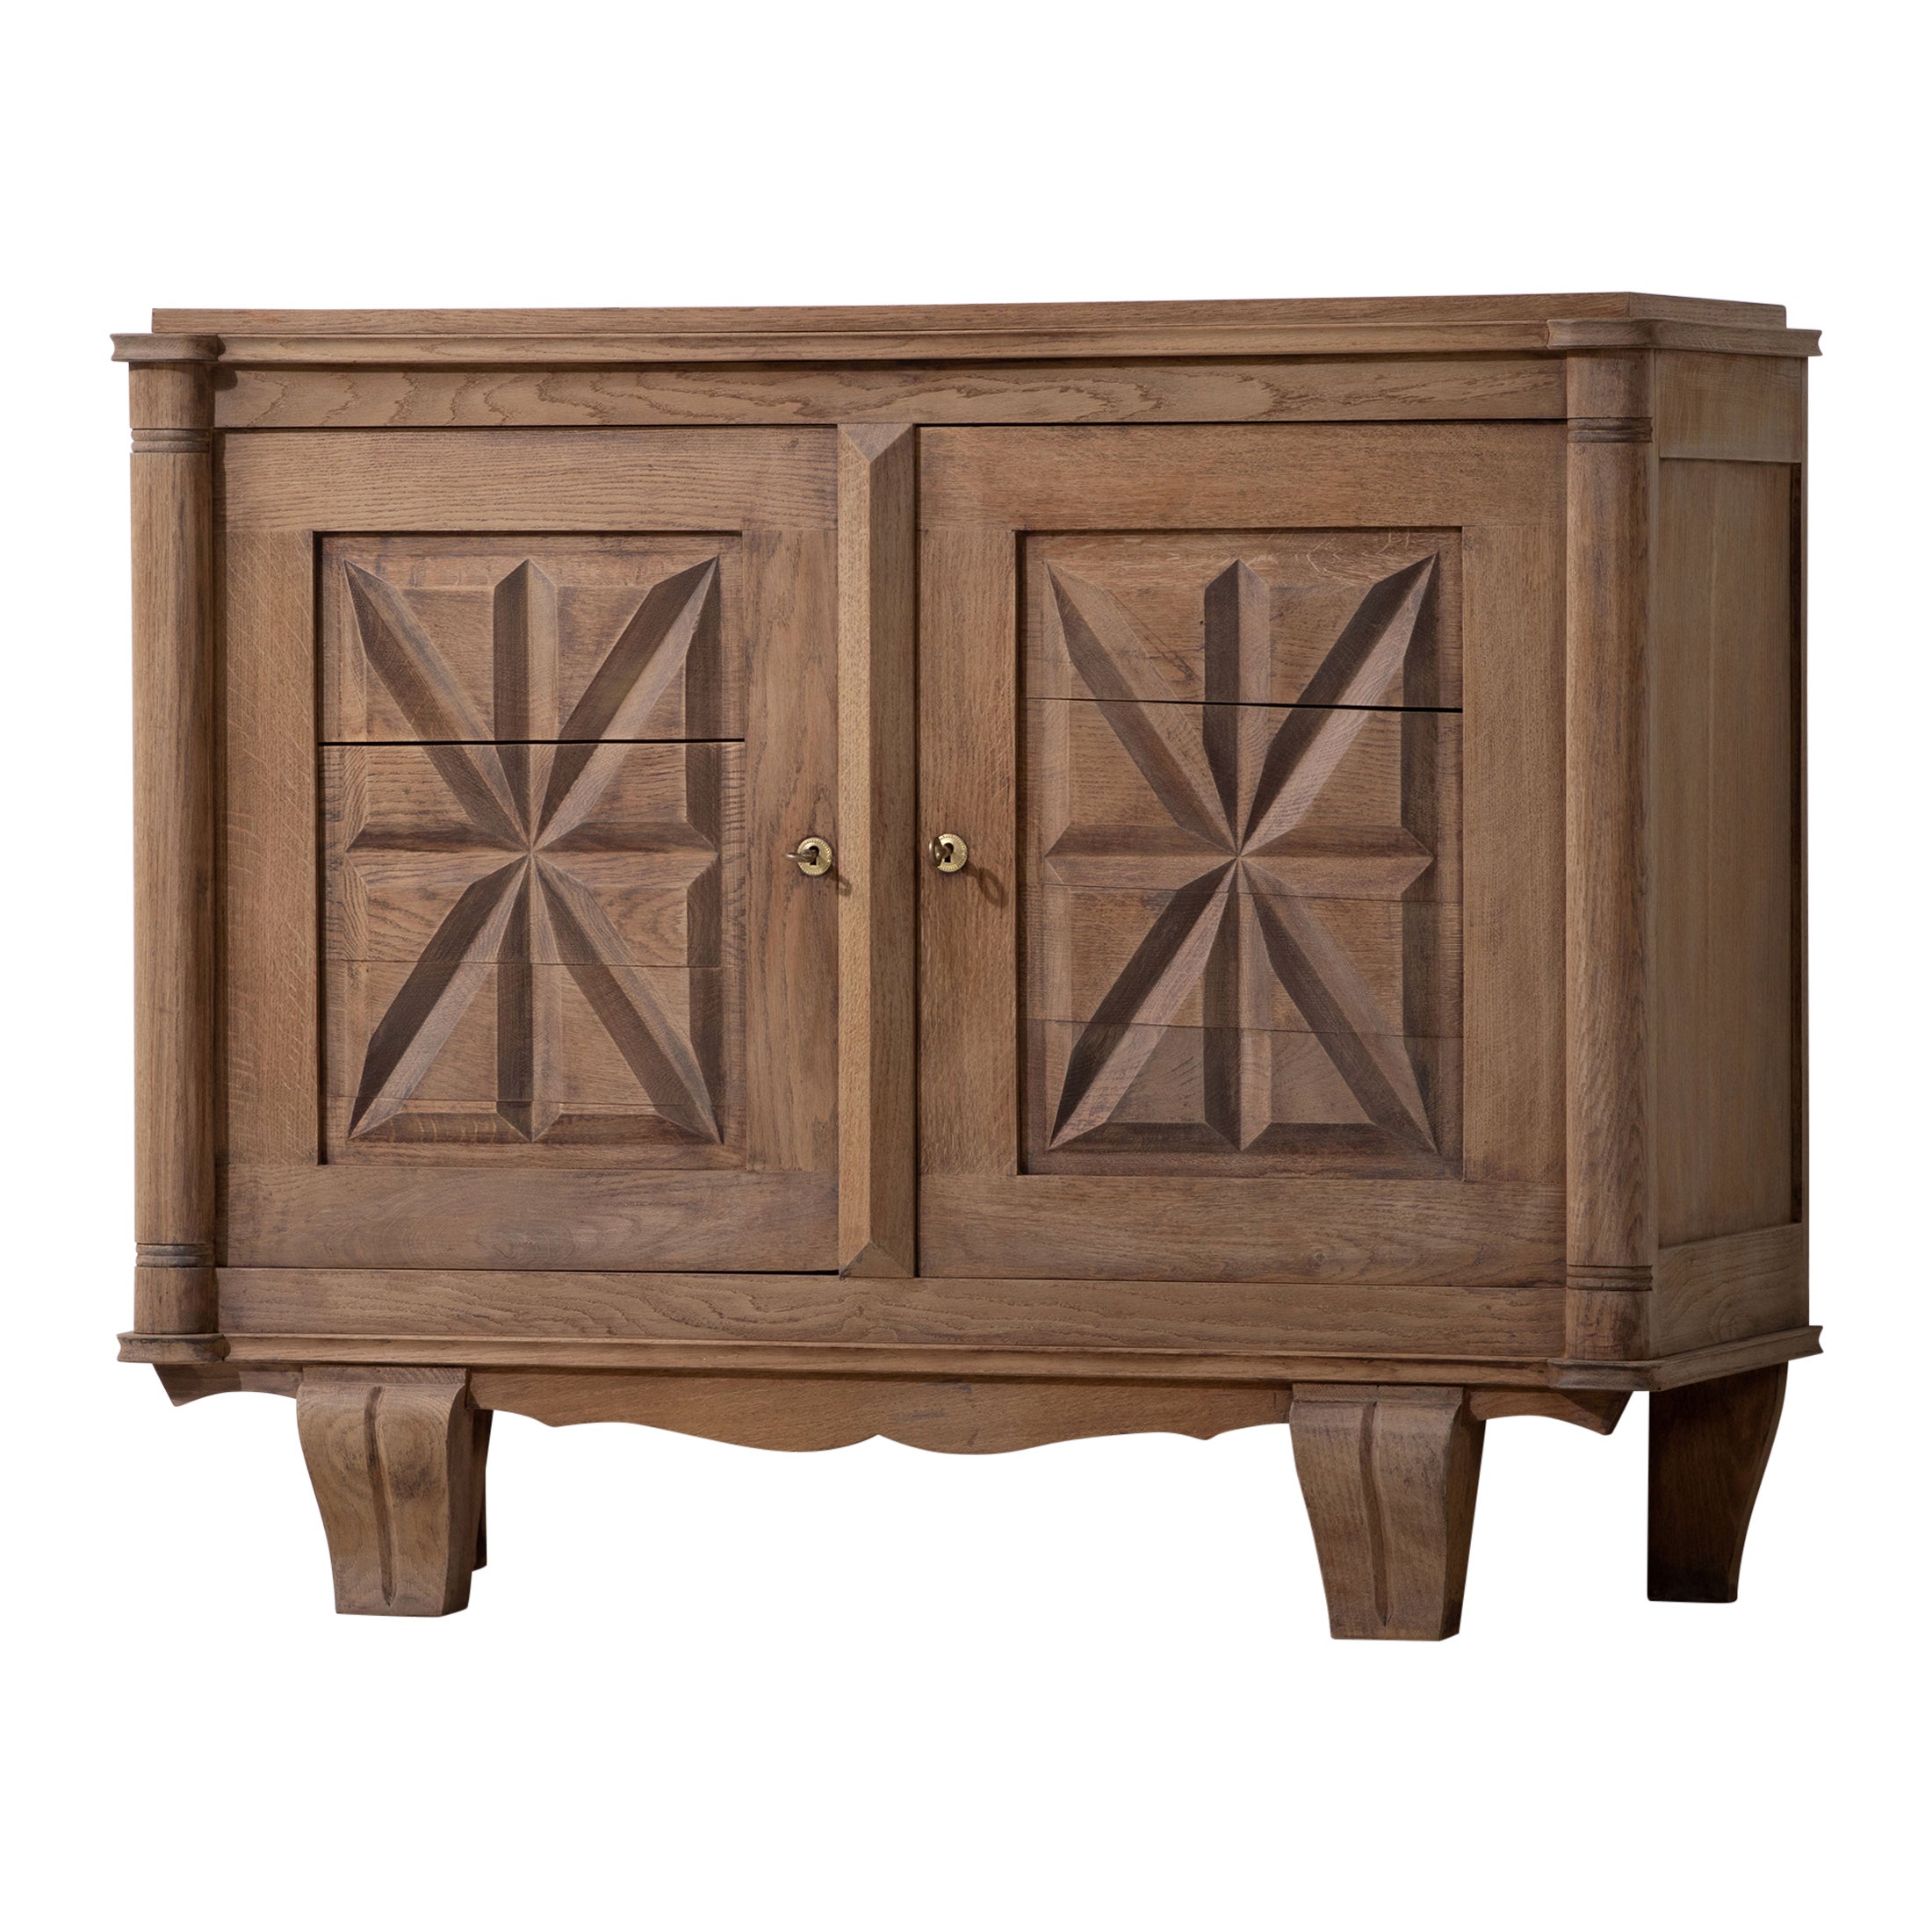 Solid Oak Credenza with Graphic Details, France, 1940s For Sale